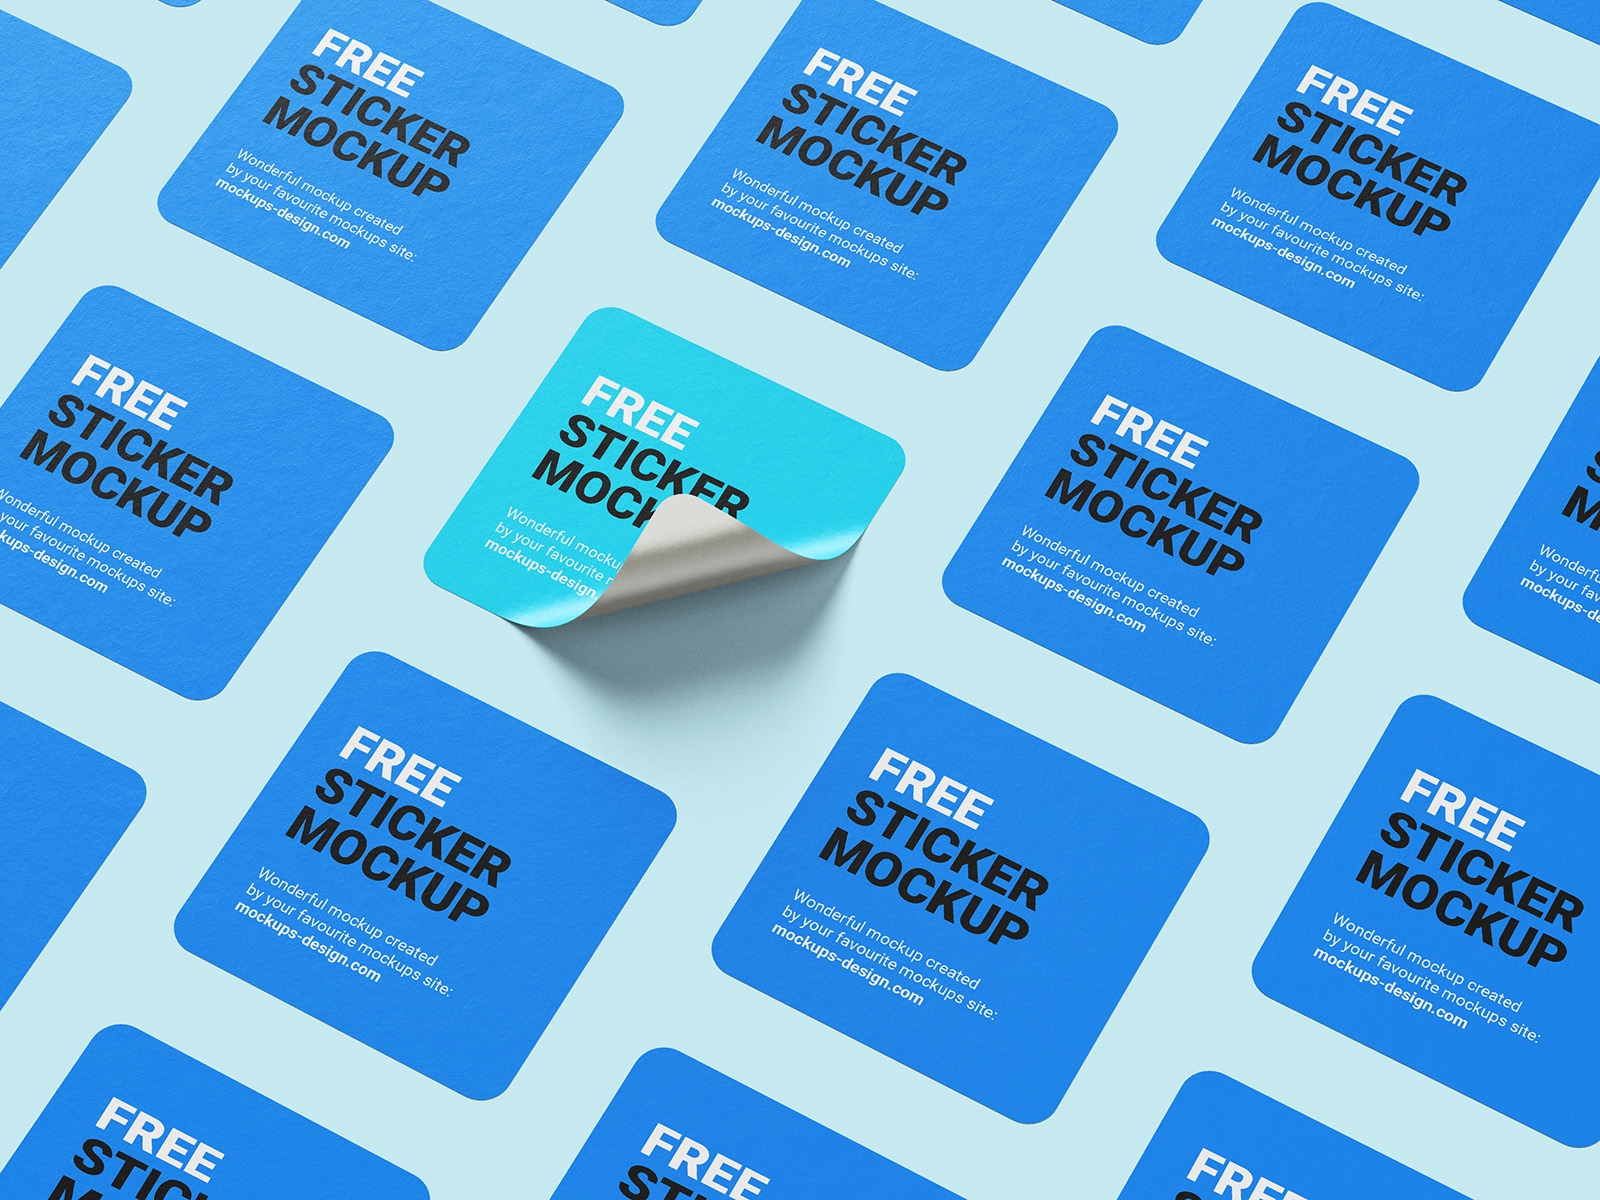 Front and Perspective View of 6 Square Sticker Mockups FREE PSD